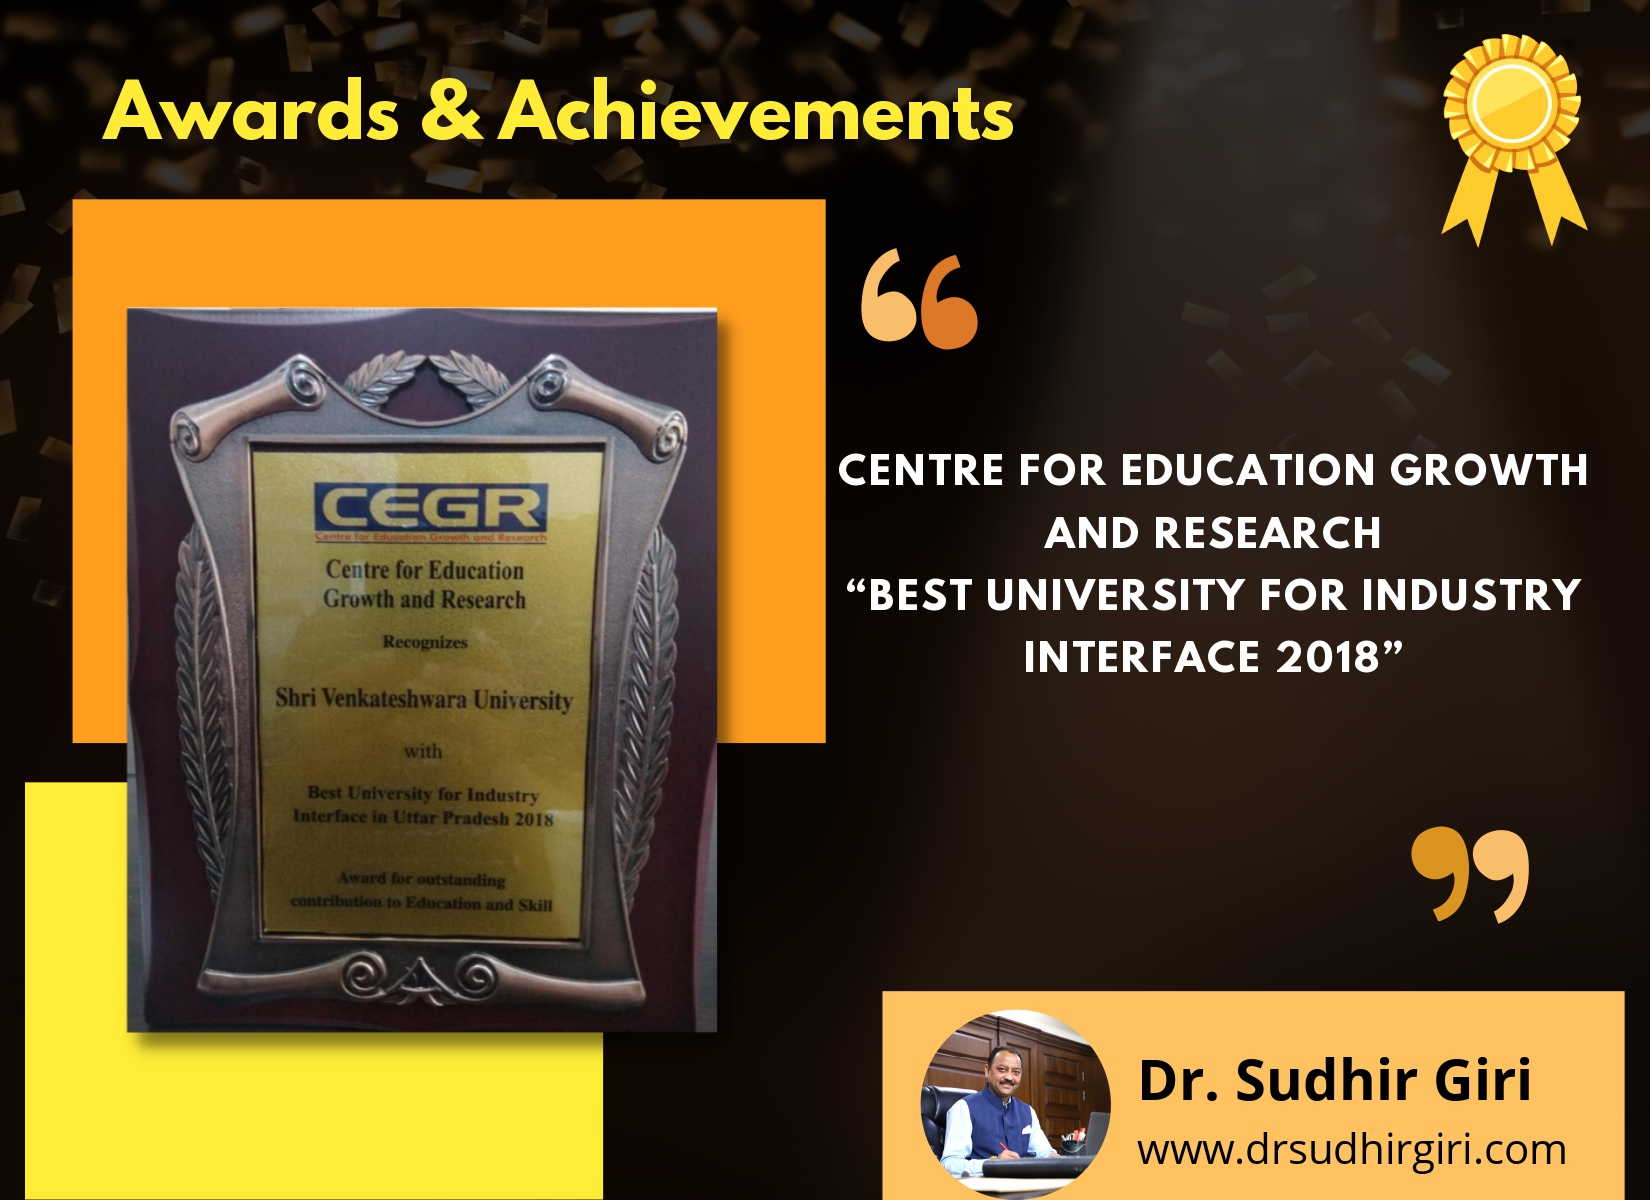 Dr Giri - Centre for Education Growth and Research “Best University for Industry Interface 2018”